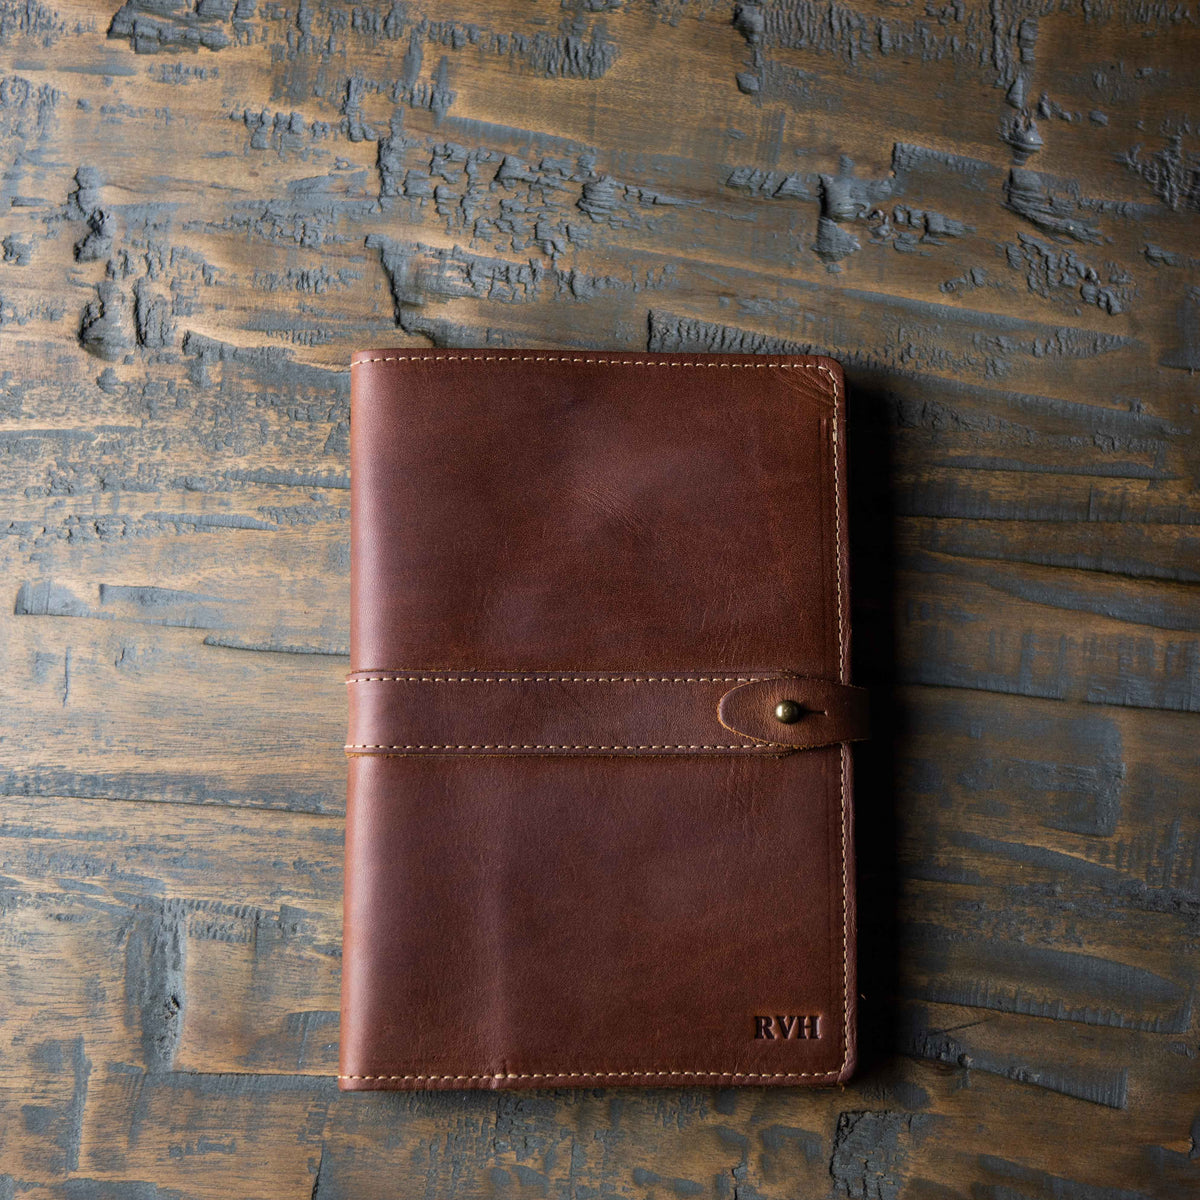 The California Inventor Personalized Fine Leather A5 Moleskine Journal Diary with California Logo